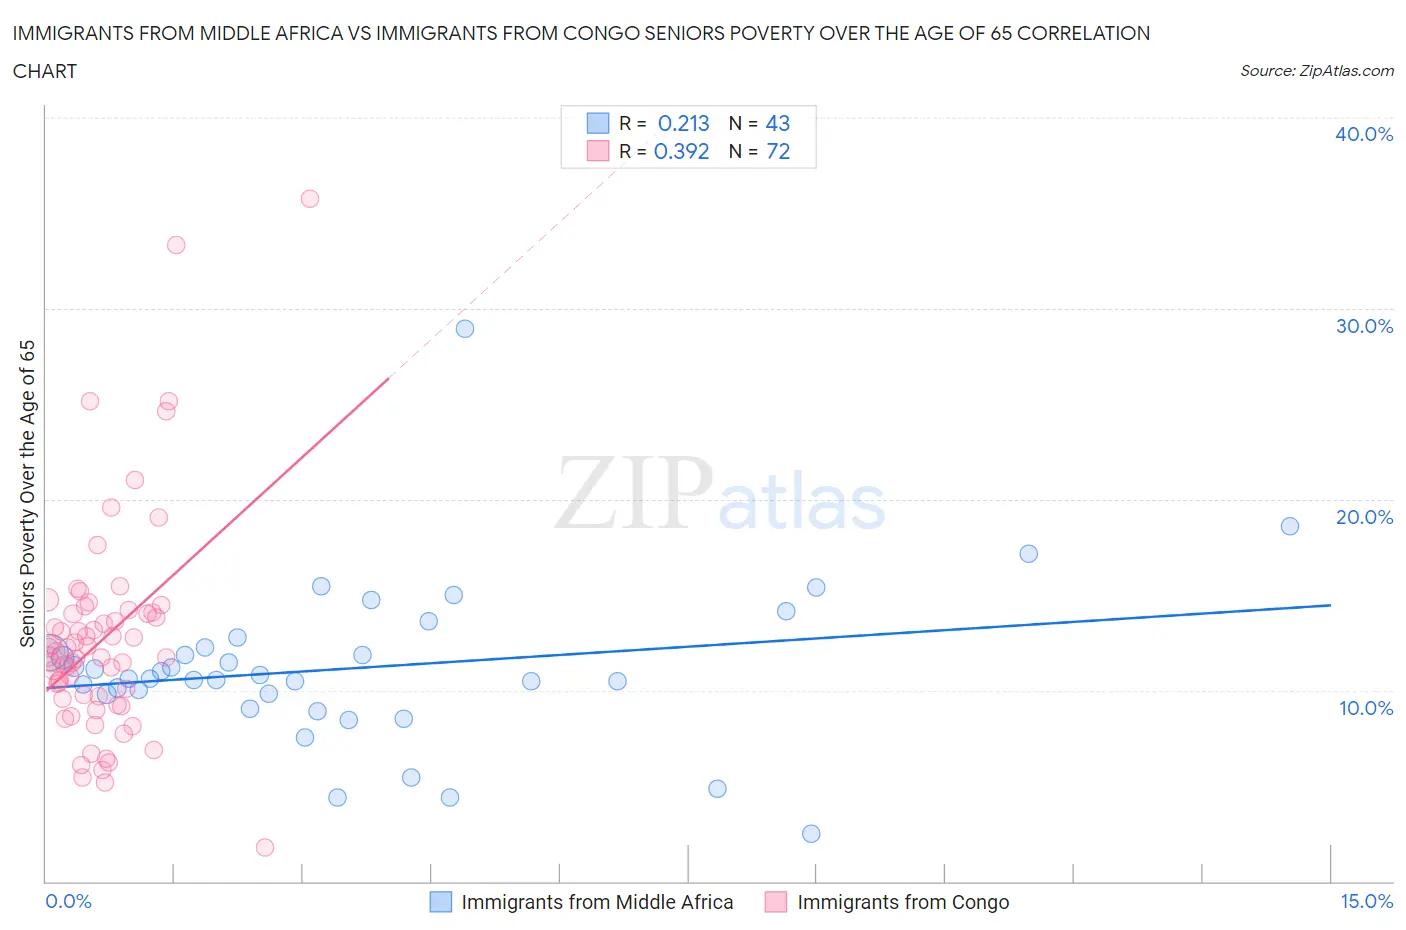 Immigrants from Middle Africa vs Immigrants from Congo Seniors Poverty Over the Age of 65